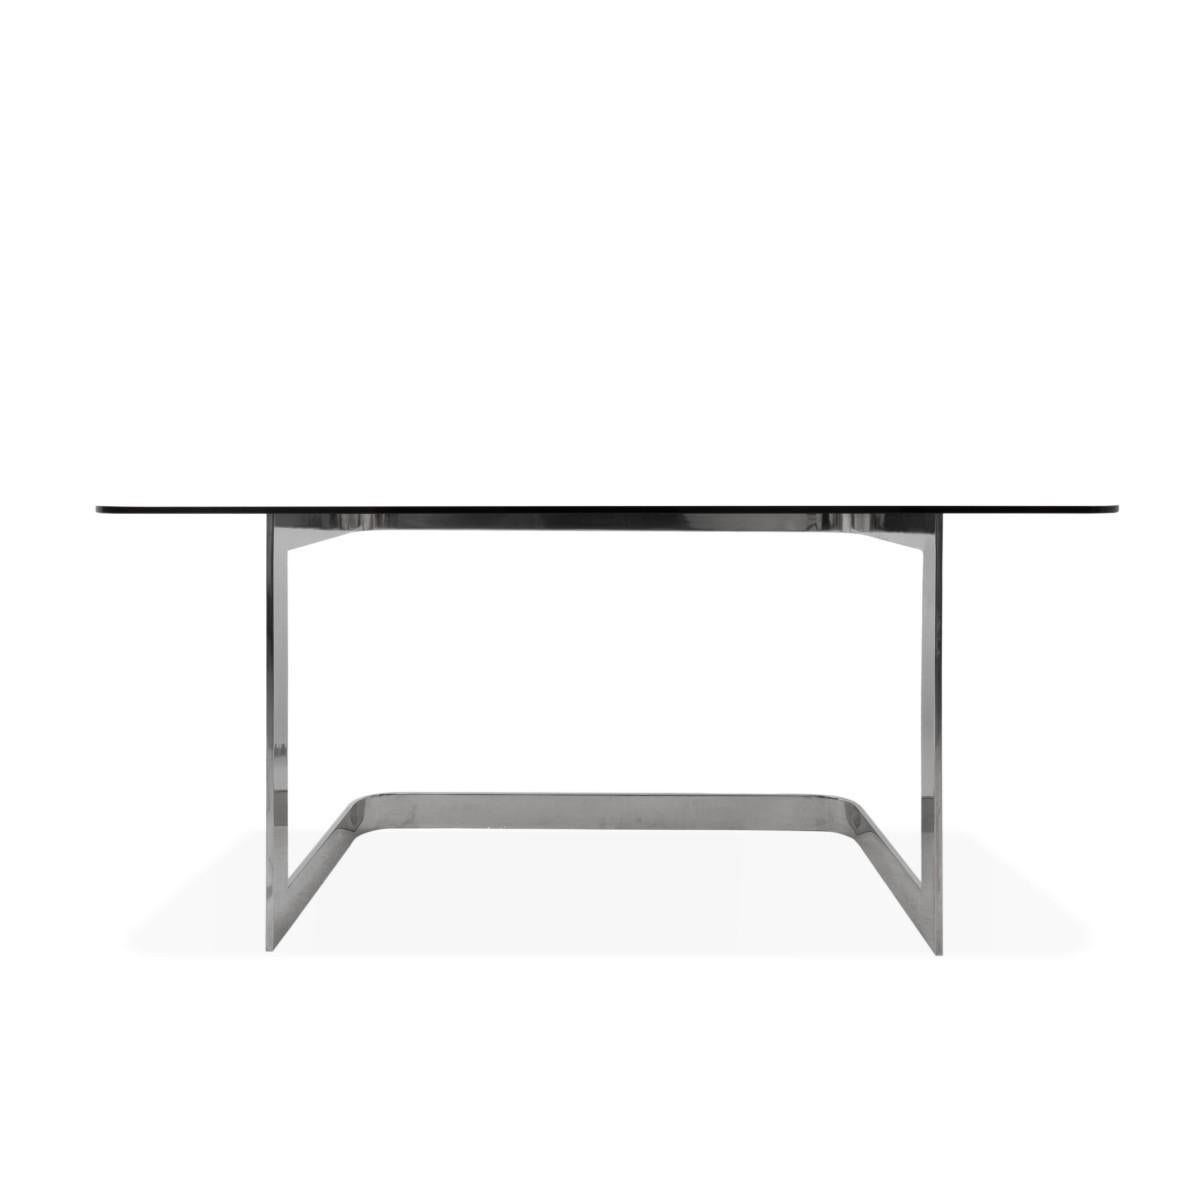 Chrome desk with glass top in the style of Milo Baughman, USA, circa 1970.

Measures: L 60.0